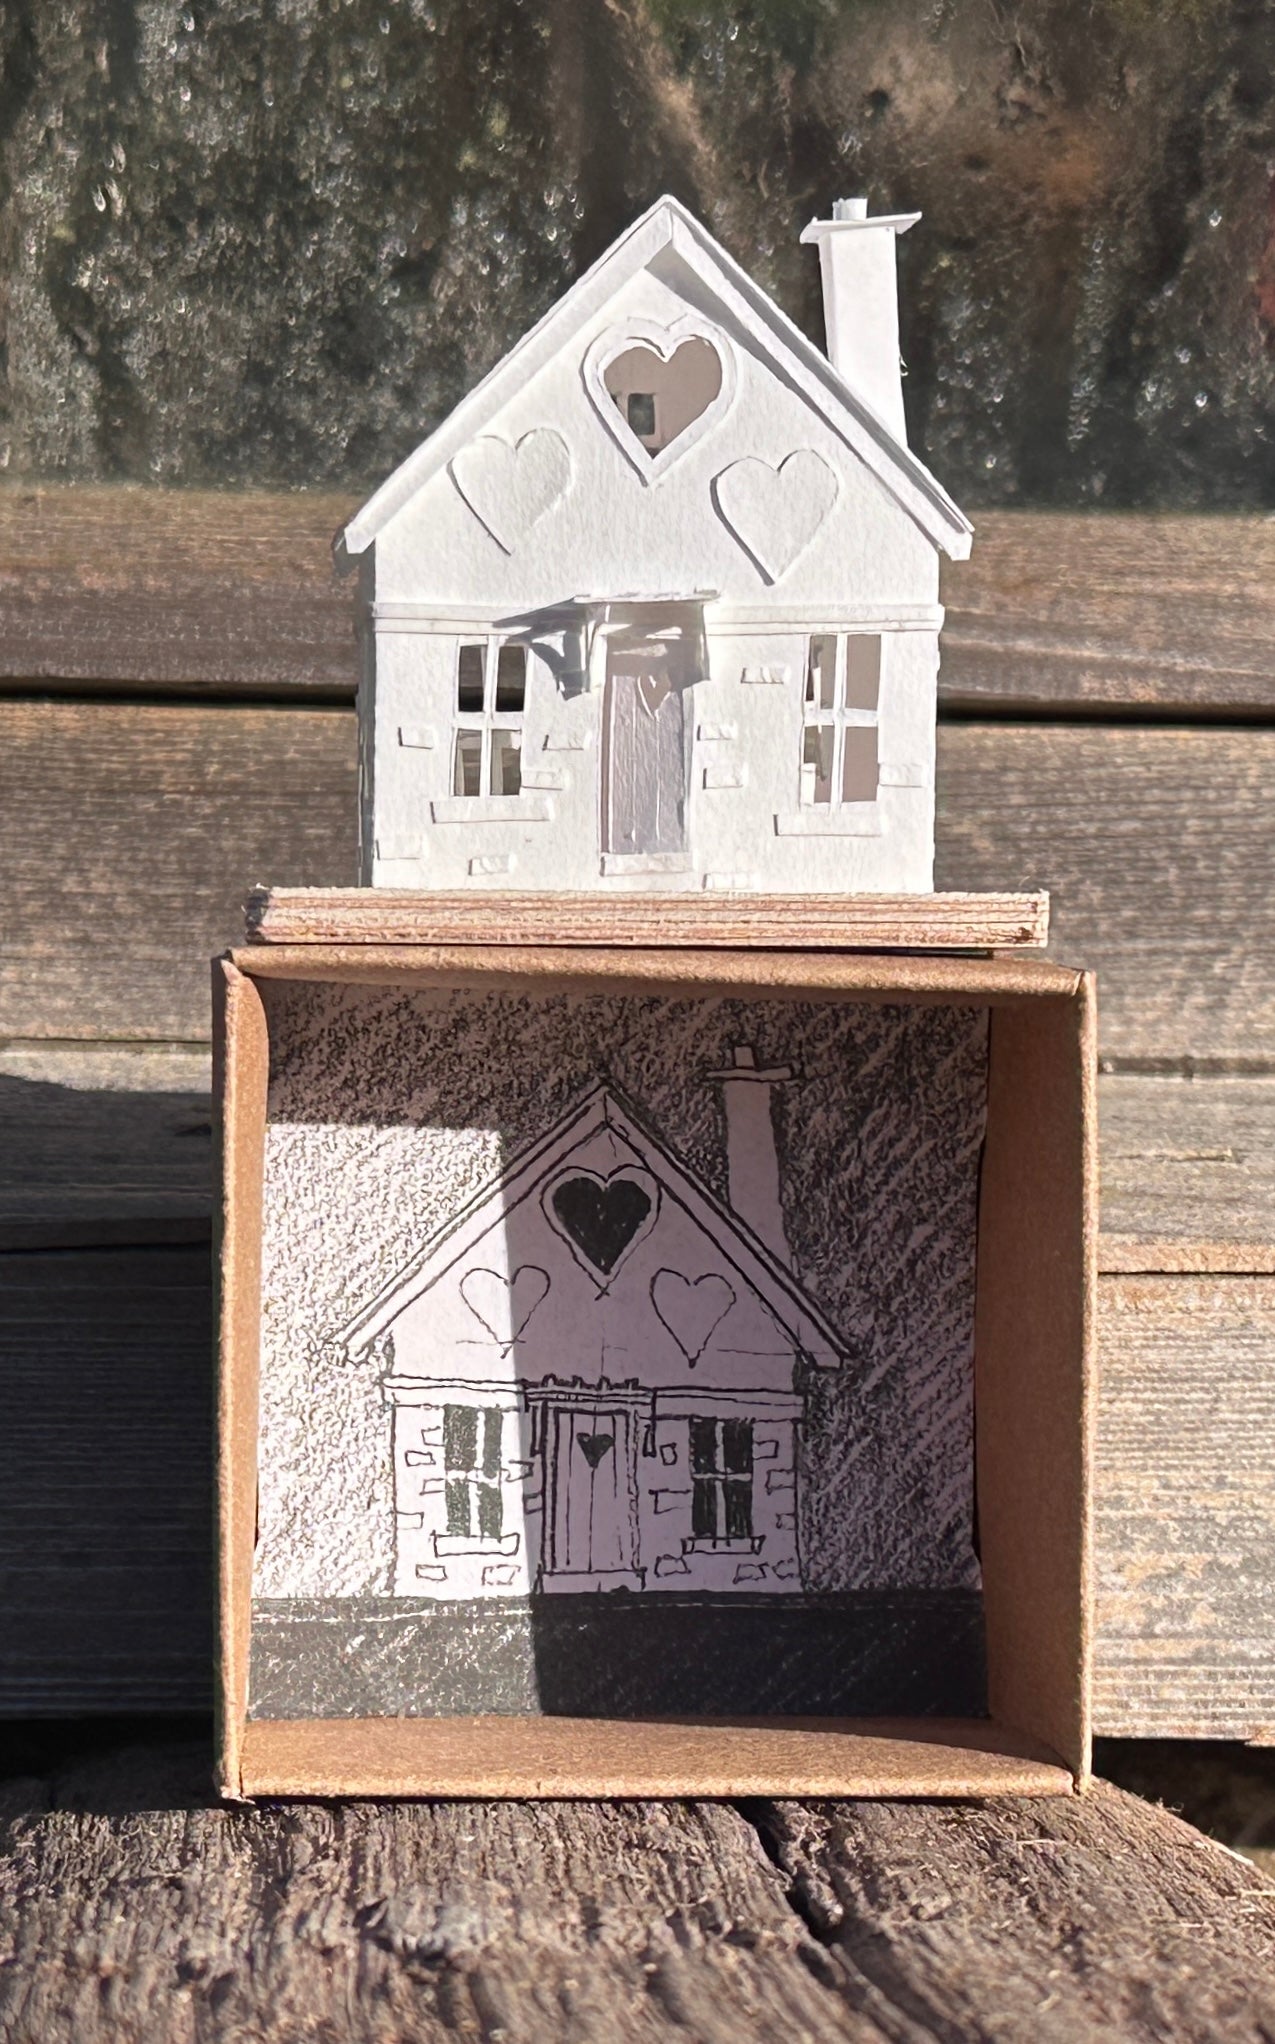 White paper gable fronted house with a heart shaped window and two applied hearts and a  tall chimney, standing on presentation box.